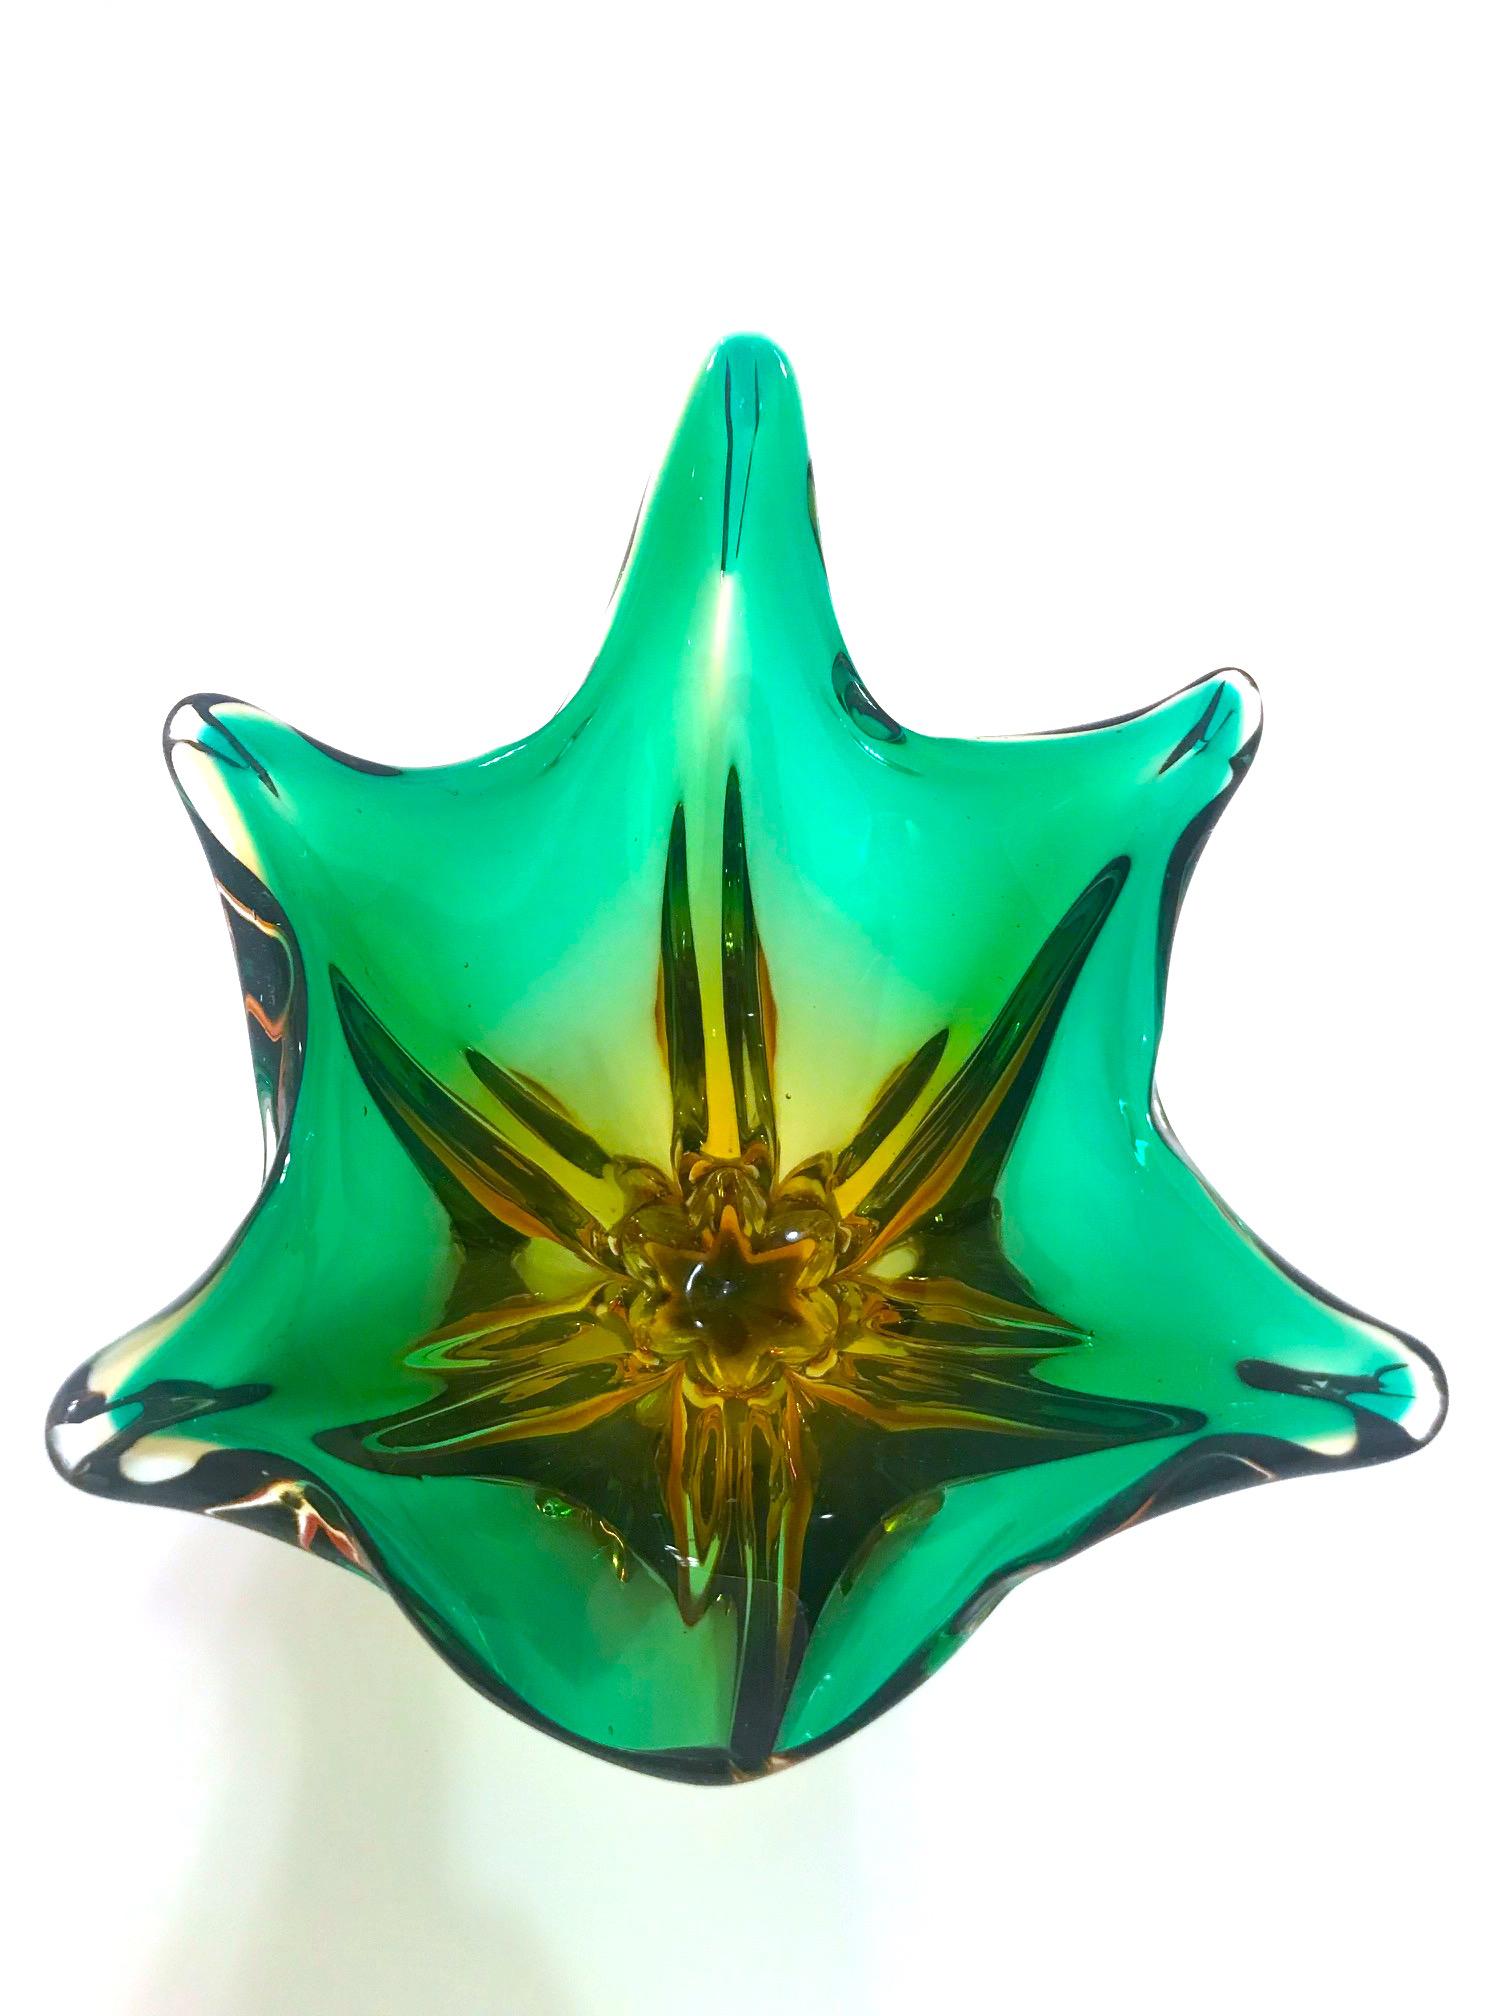 French 1950s Abstract Murano Sommerso Vase in Emerald and Amber Hues, Italy